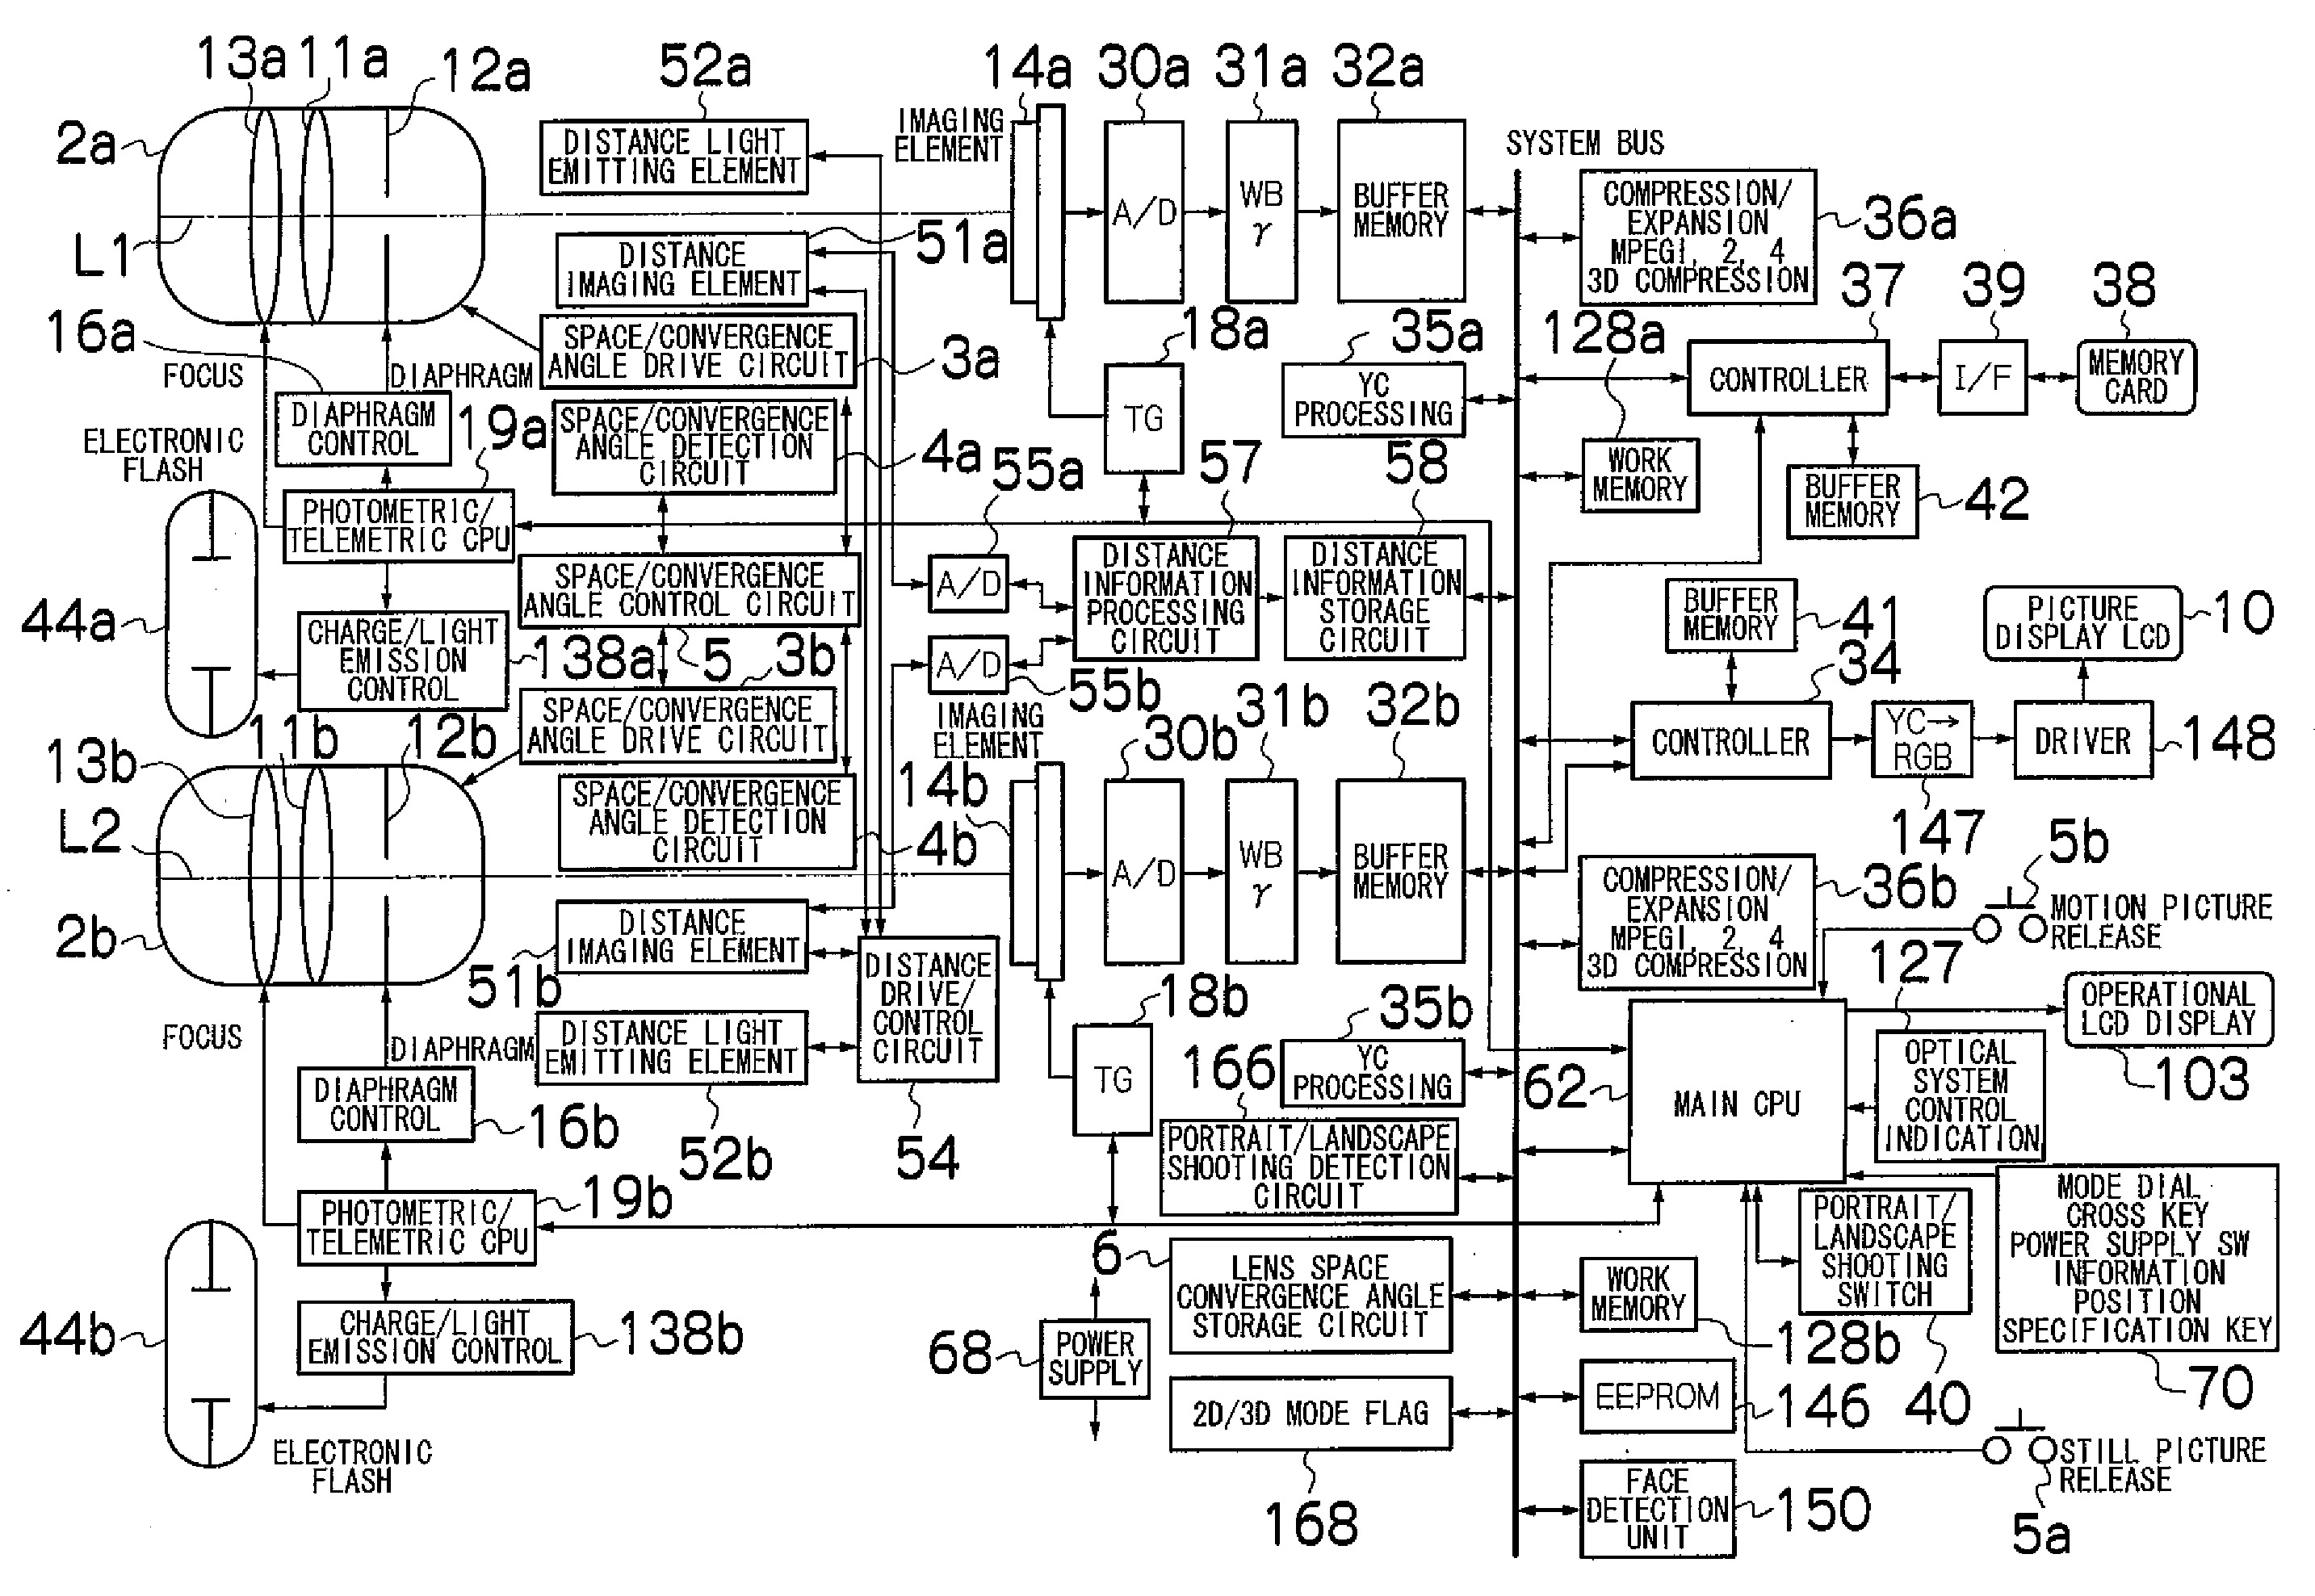 Picture processing apparatus, picture recording apparatus, method and program thereof